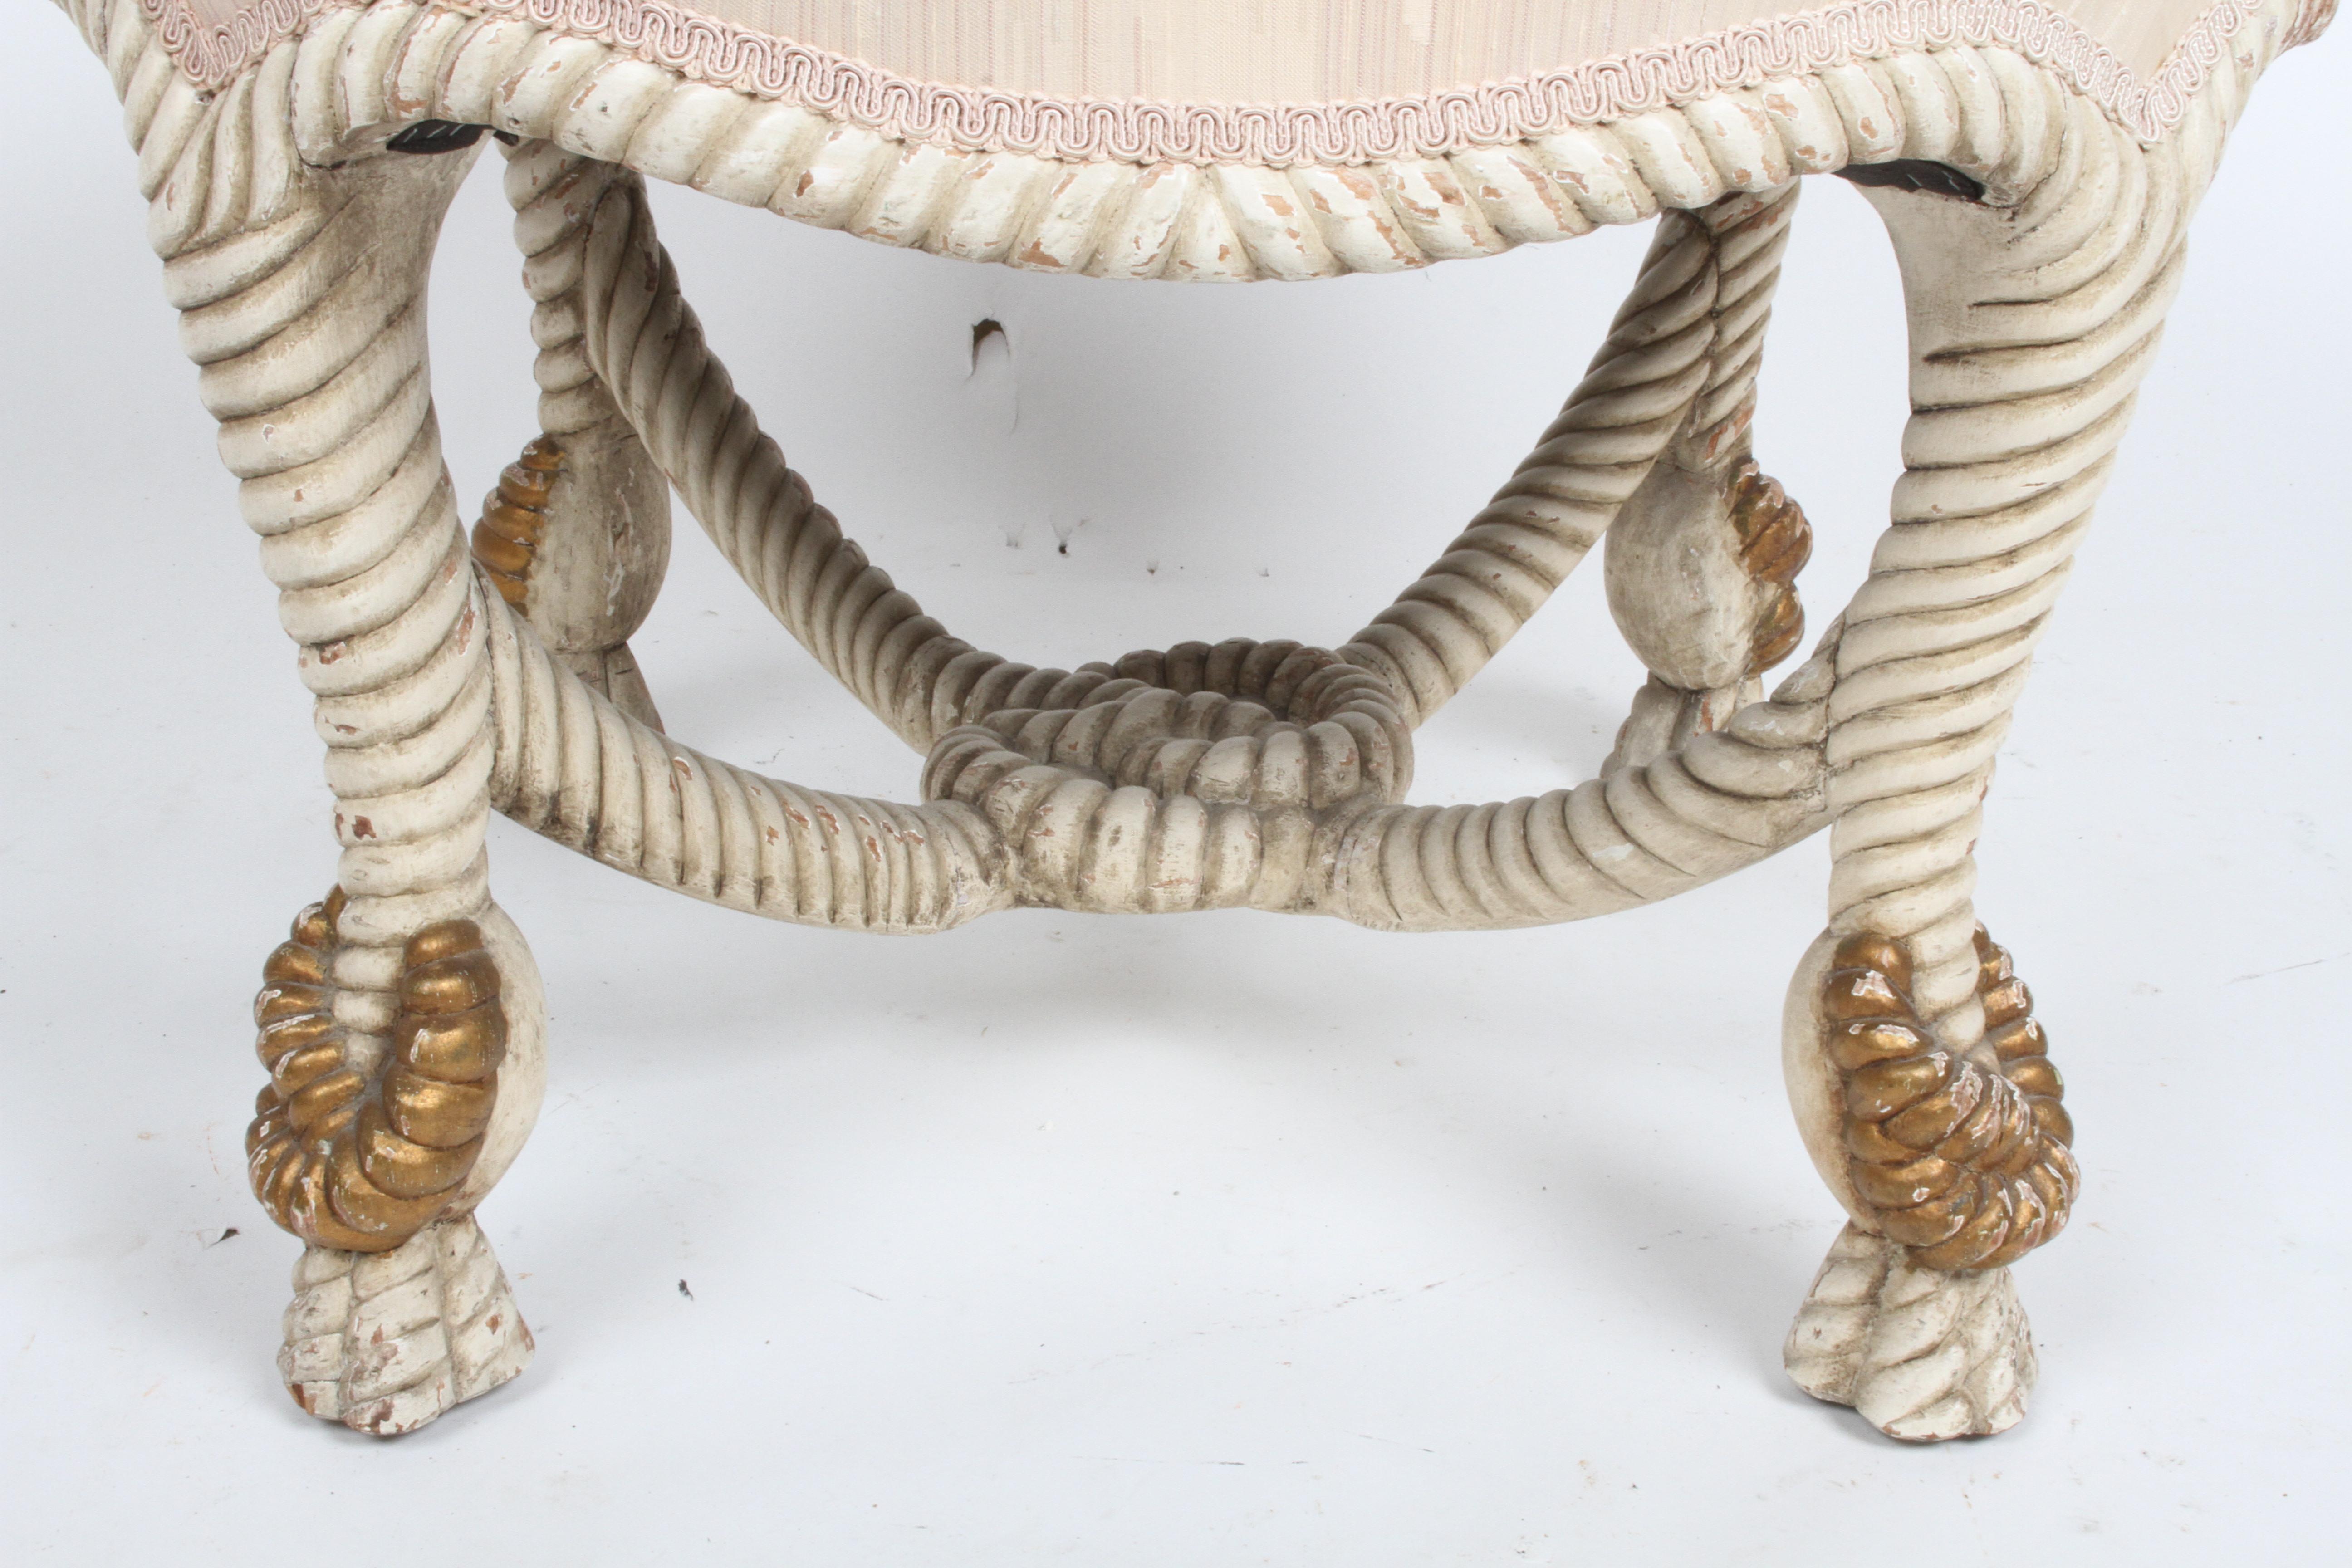 Vintage 40's Italian Cream & Gold Gilt Faux Rope Tassel Ottoman, Stool or Bench For Sale 4